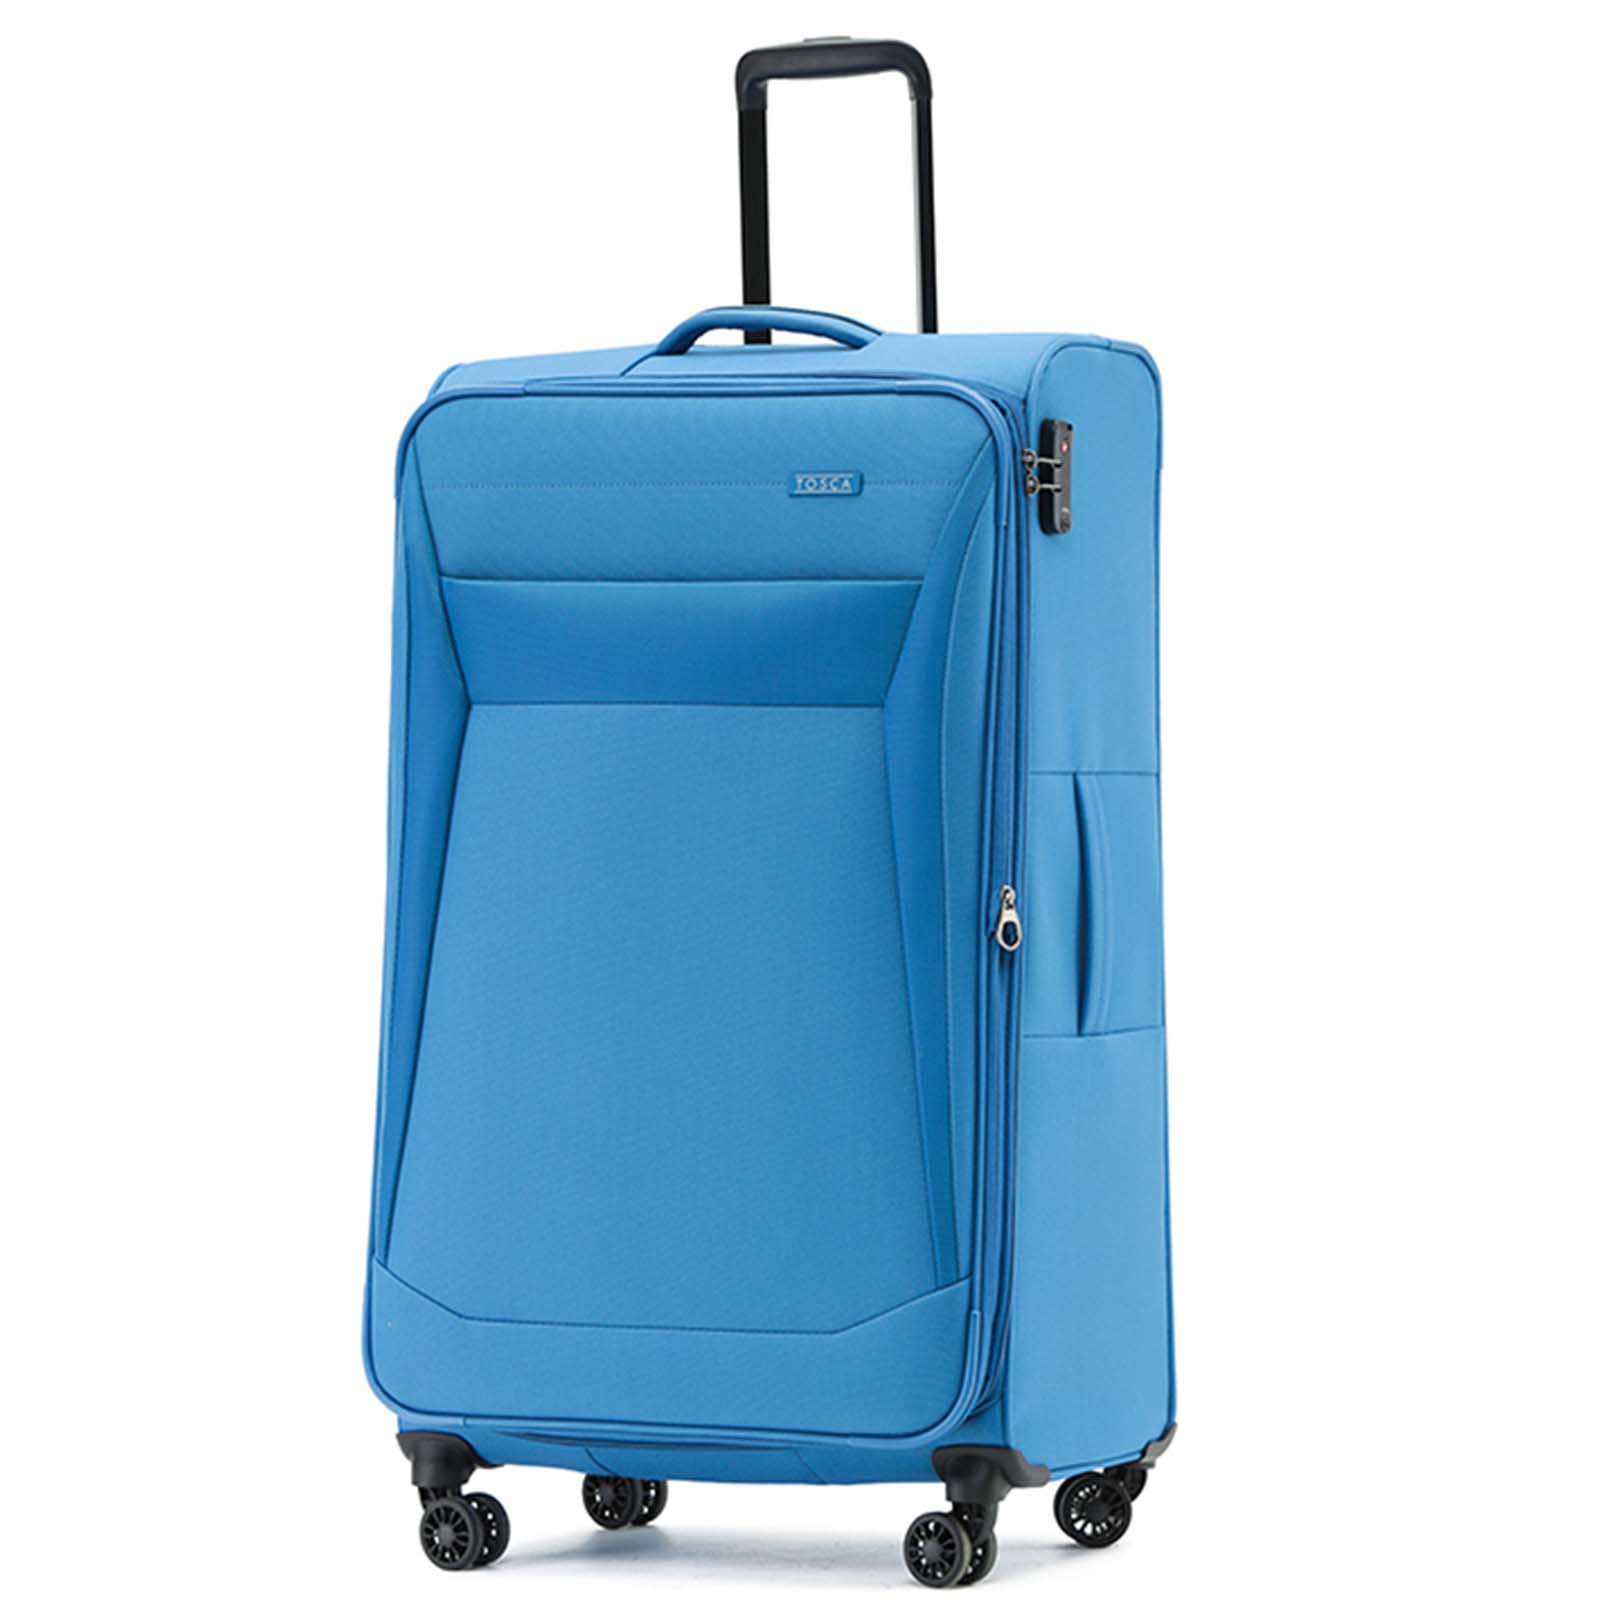 Tosca-Aviator-4-Wheel-Large-Suitcase-Blue-Front-Angle